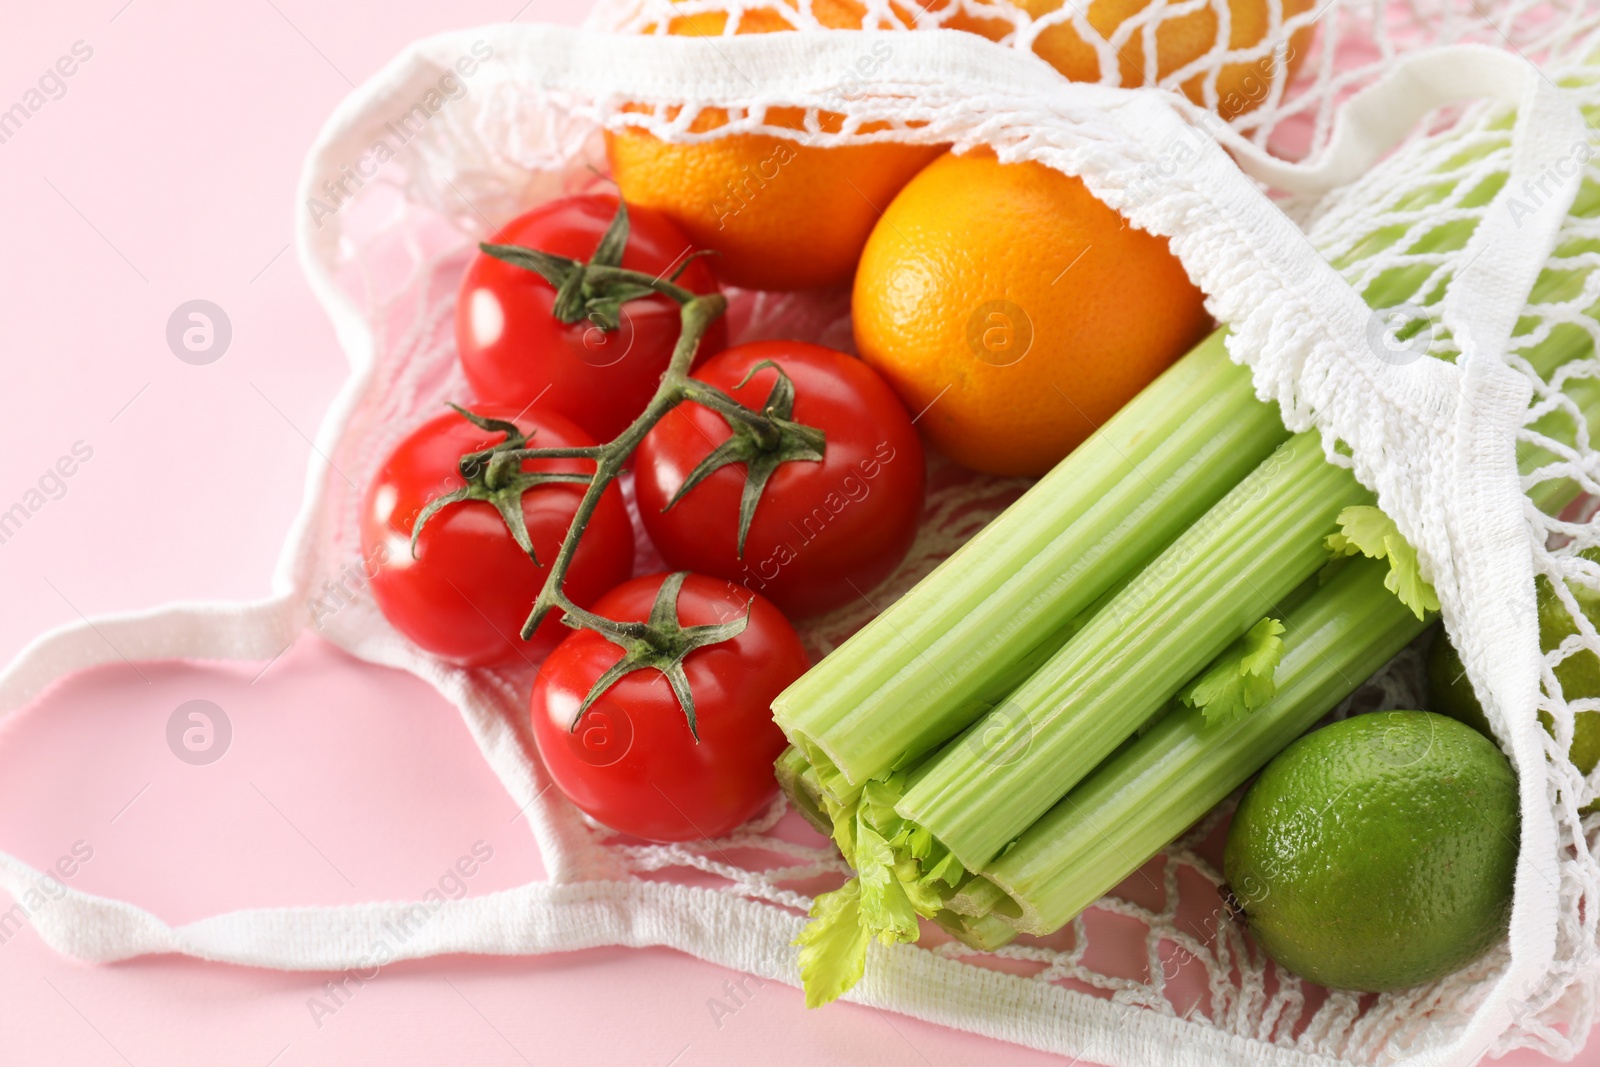 Photo of String bag with different vegetables and fruits on pink background, closeup